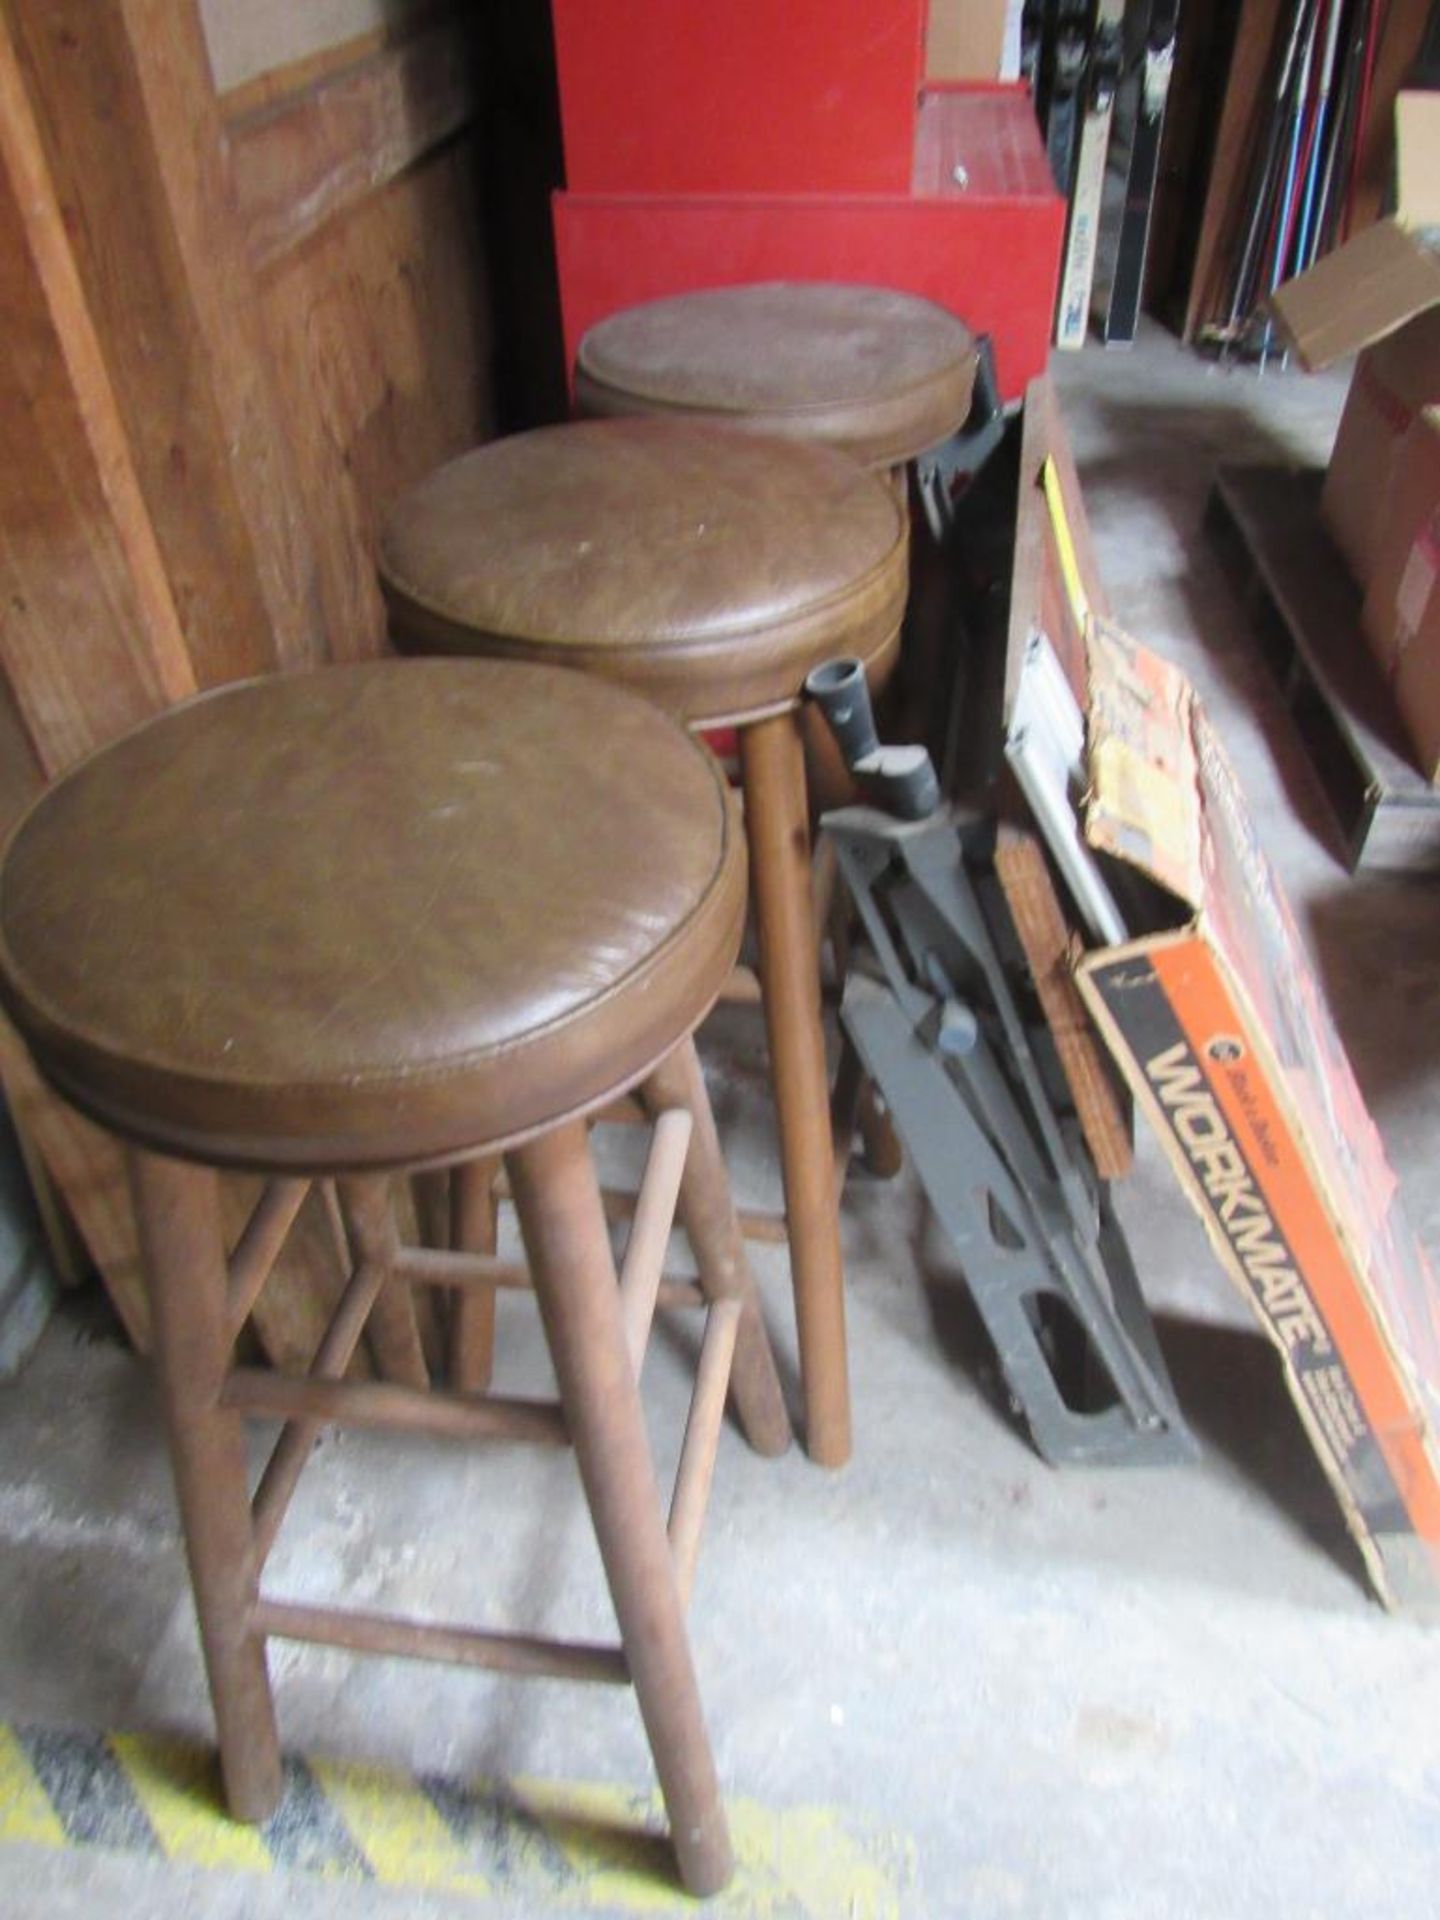 Lot: Workmate 300 Work Bench and stools - Image 3 of 3